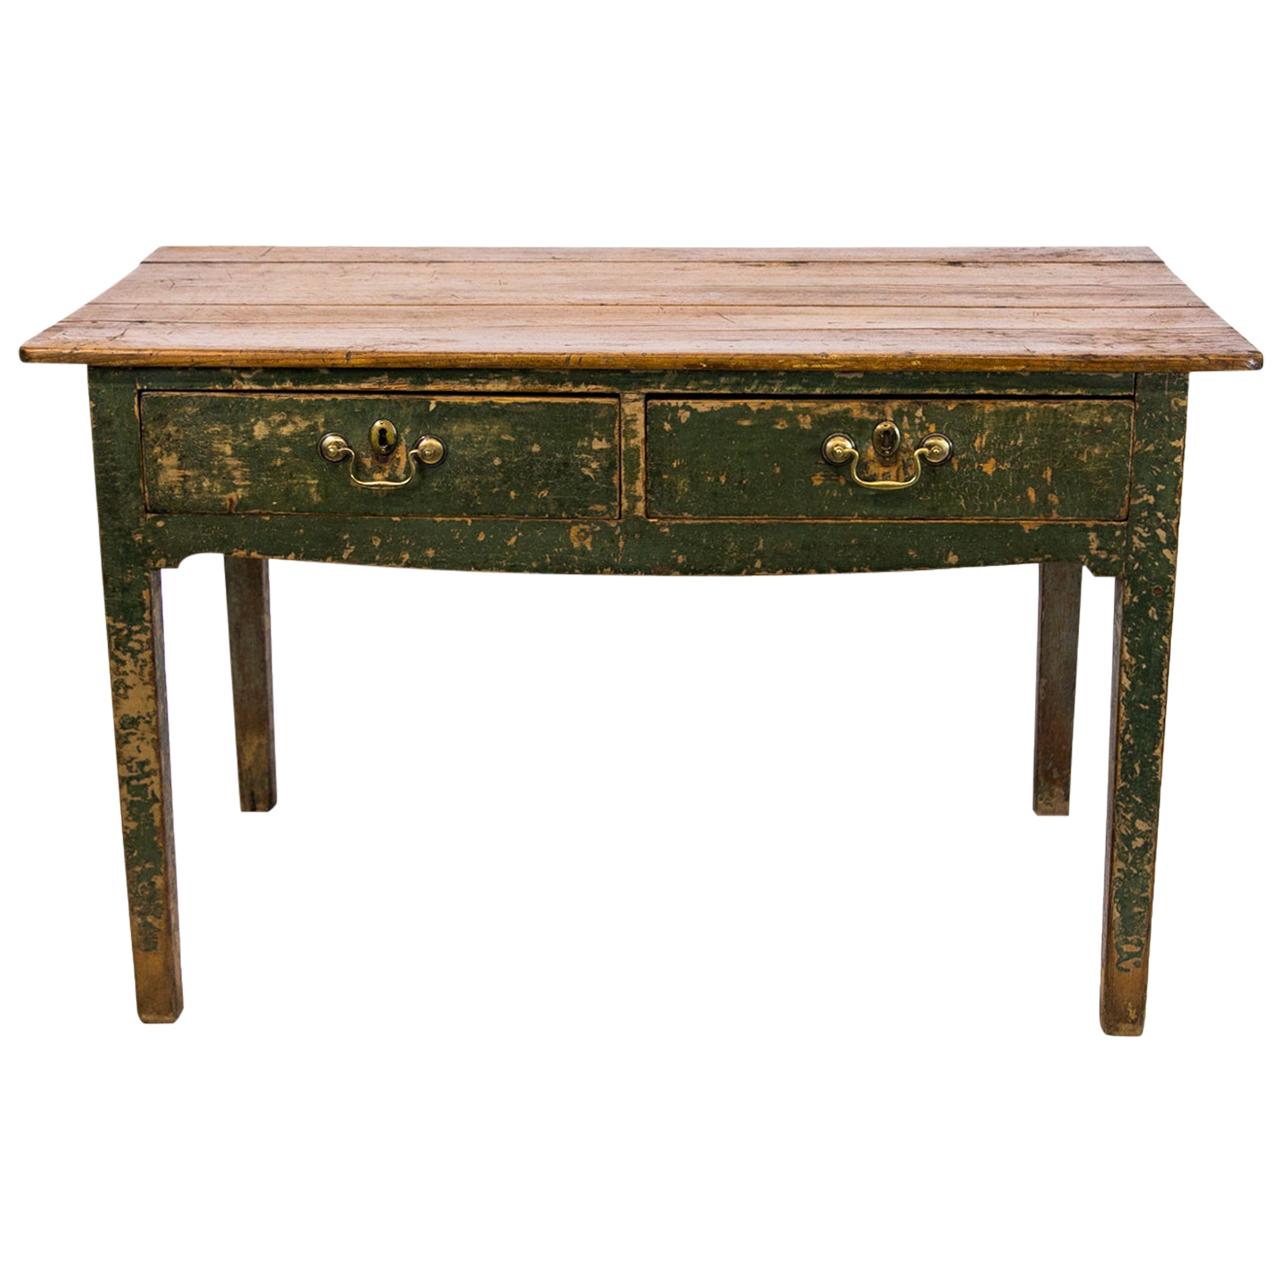 Two-Drawer English Pine Painted Table